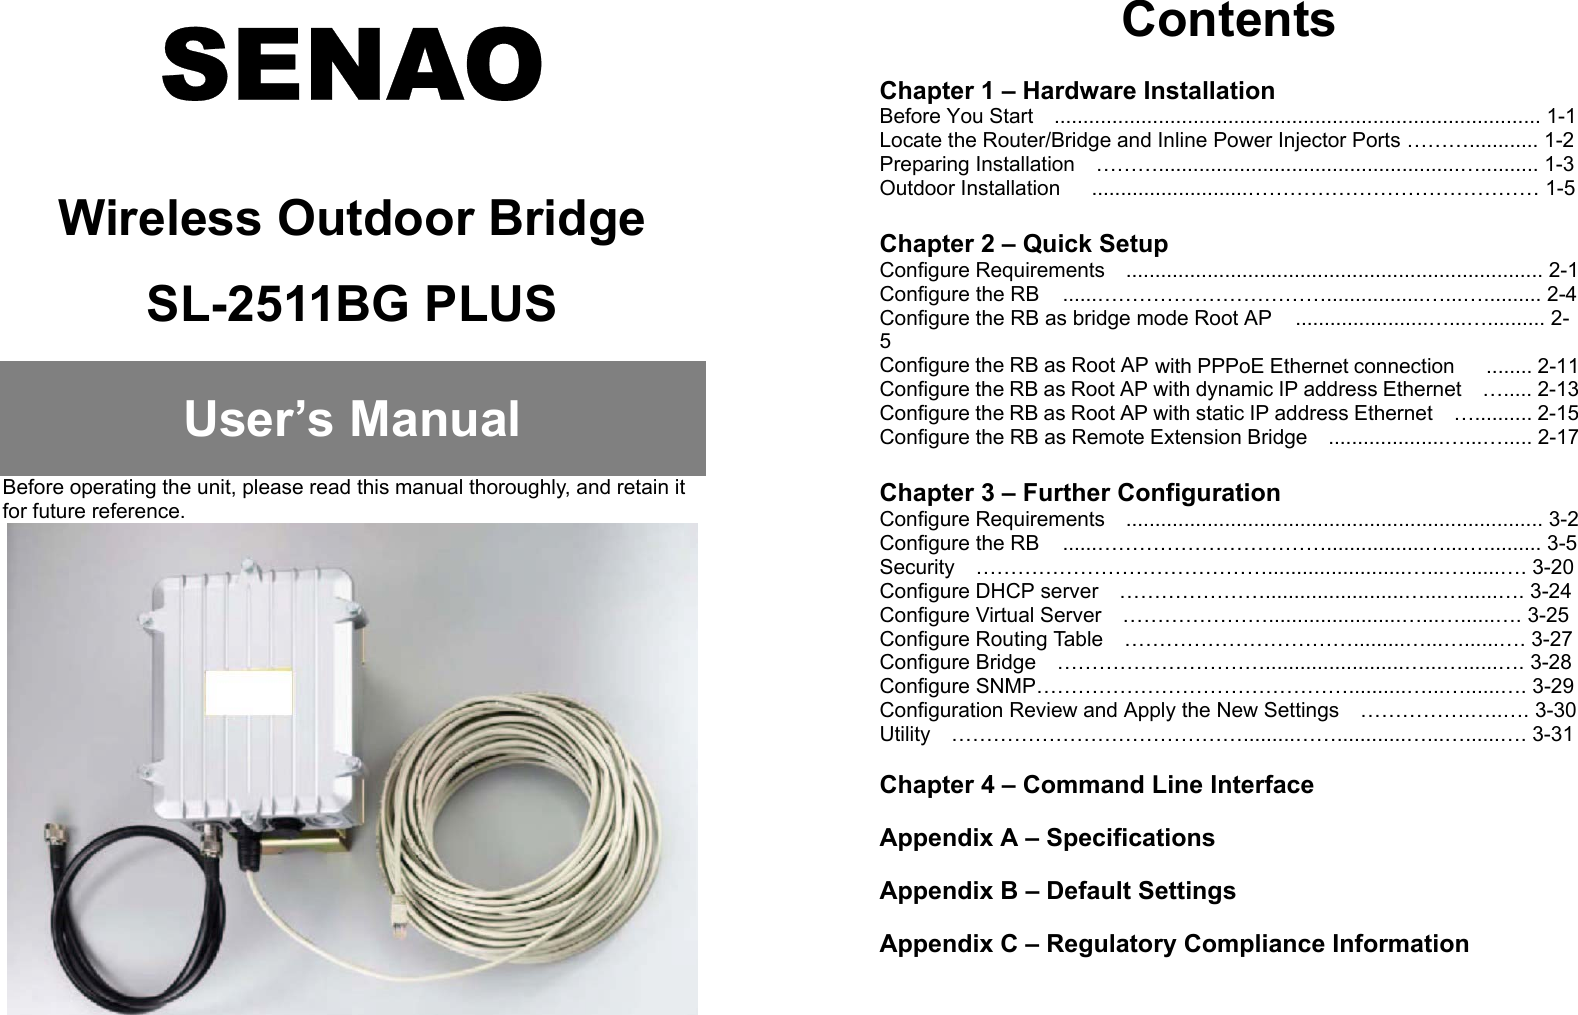 SENAOWireless Outdoor BridgeSL-2511BG PLUSUser’s ManualBefore operating the unit, please read this manual thoroughly, and retain itfor future reference.ContentsChapter 1 – Hardware InstallationBefore You Start    .................................................................................... 1-1Locate the Router/Bridge and Inline Power Injector Ports ………............ 1-2Preparing Installation  ………....................................................….......... 1-3Outdoor Installation      ...........................…………………………………… 1-5Chapter 2 – Quick SetupConfigure Requirements  ........................................................................ 2-1Configure the RB   ......…………………………….................…...….......... 2-4Configure the RB as bridge mode Root AP   .......................…...….......... 2-5Configure the RB as Root AP with PPPoE Ethernet connection   ........ 2-11Configure the RB as Root AP with dynamic IP address Ethernet    …..... 2-13Configure the RB as Root AP with static IP address Ethernet    ….......... 2-15Configure the RB as Remote Extension Bridge    ....................…...…..... 2-17Chapter 3 – Further ConfigurationConfigure Requirements  ........................................................................ 3-2Configure the RB   ......…………………………….................…...….......... 3-5Security  ……………………………………........................…...…......…. 3-20Configure DHCP server  …………………........................…...…......…. 3-24Configure Virtual Server    ………………….......................…...…......…. 3-25Configure Routing Table    …………………………….........…...…......…. 3-27Configure Bridge    …………………………........................…...…......…. 3-28Configure SNMP………………………………………..........…...…......…. 3-29Configuration Review and Apply the New Settings    …………….…..…. 3-30Utility  …………………………………….........……............…...…......…. 3-31Chapter 4 – Command Line InterfaceAppendix A – Specifications  Appendix B – Default Settings  Appendix C – Regulatory Compliance Information